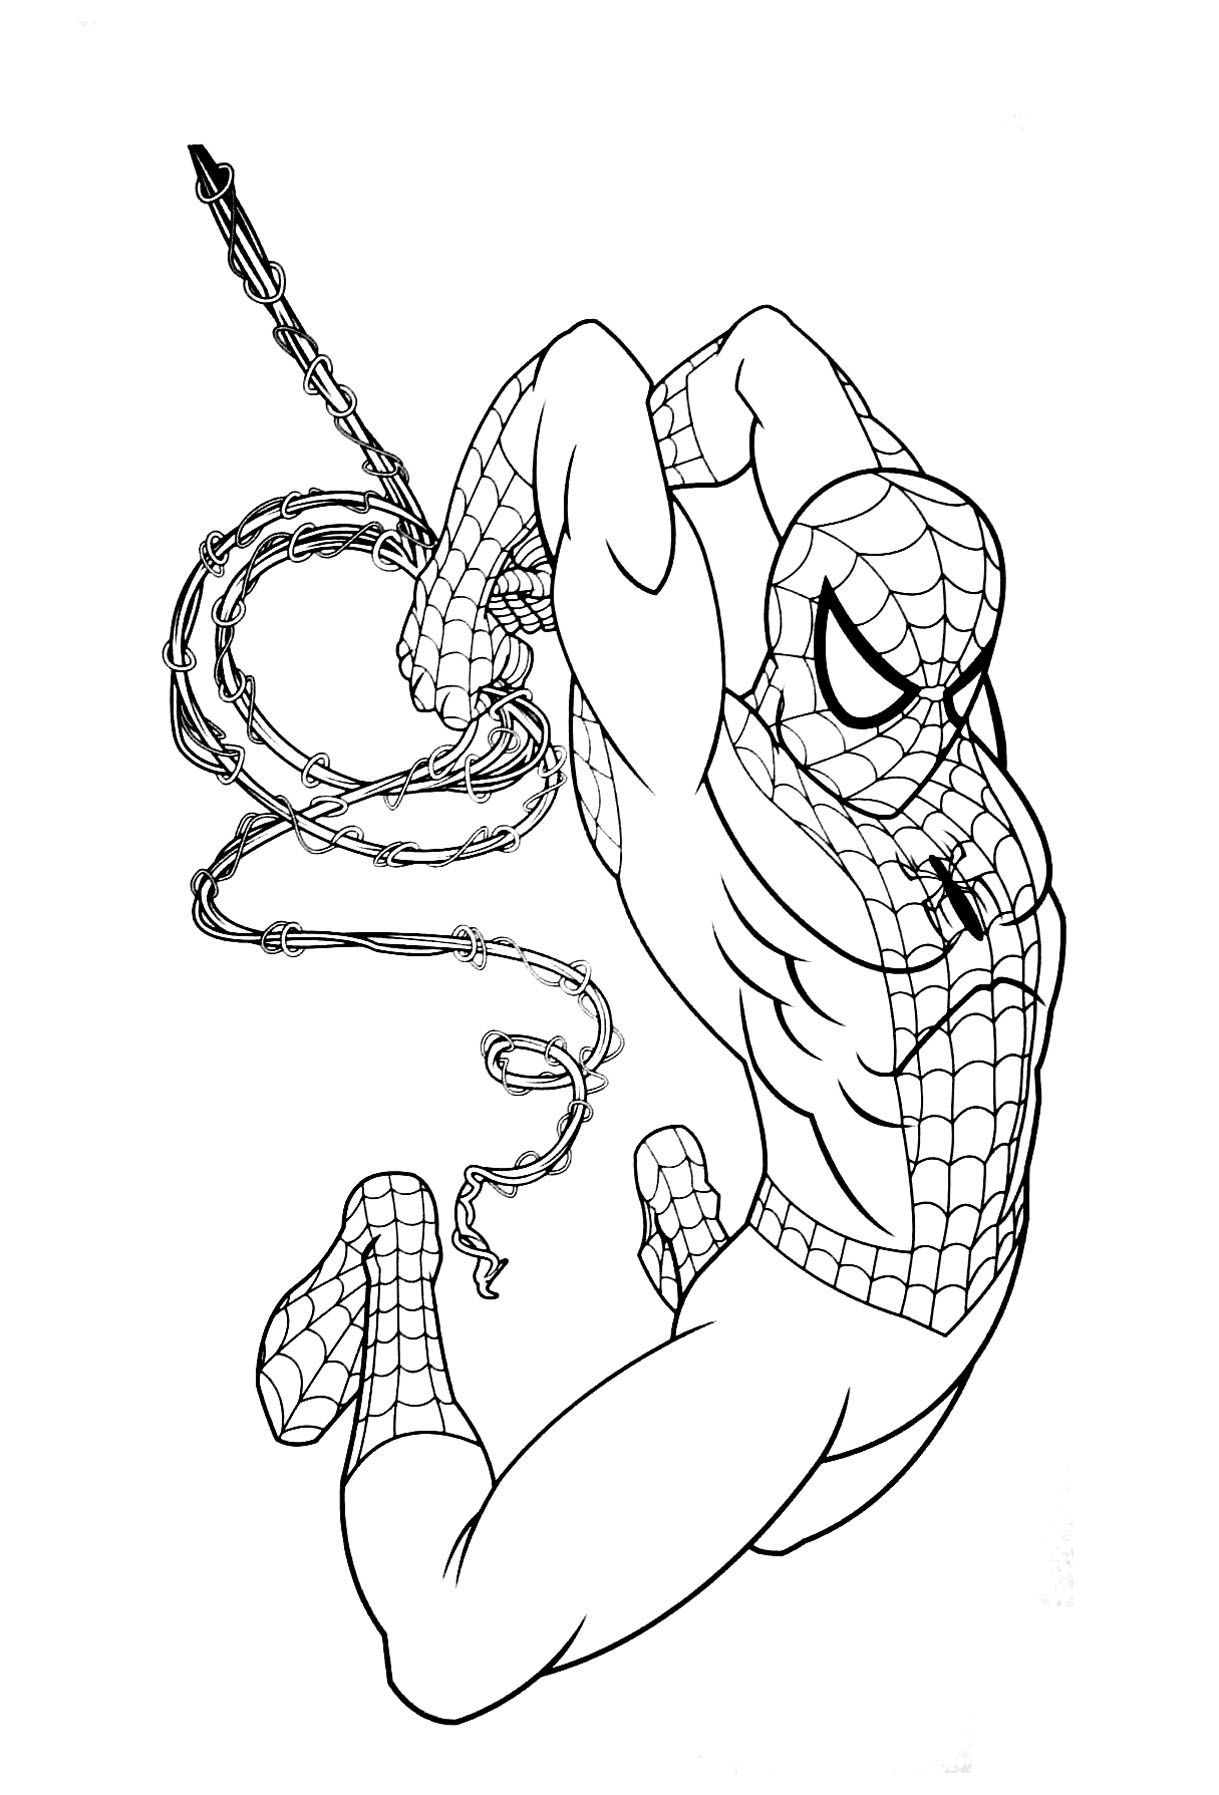 Spiderman free to color for children